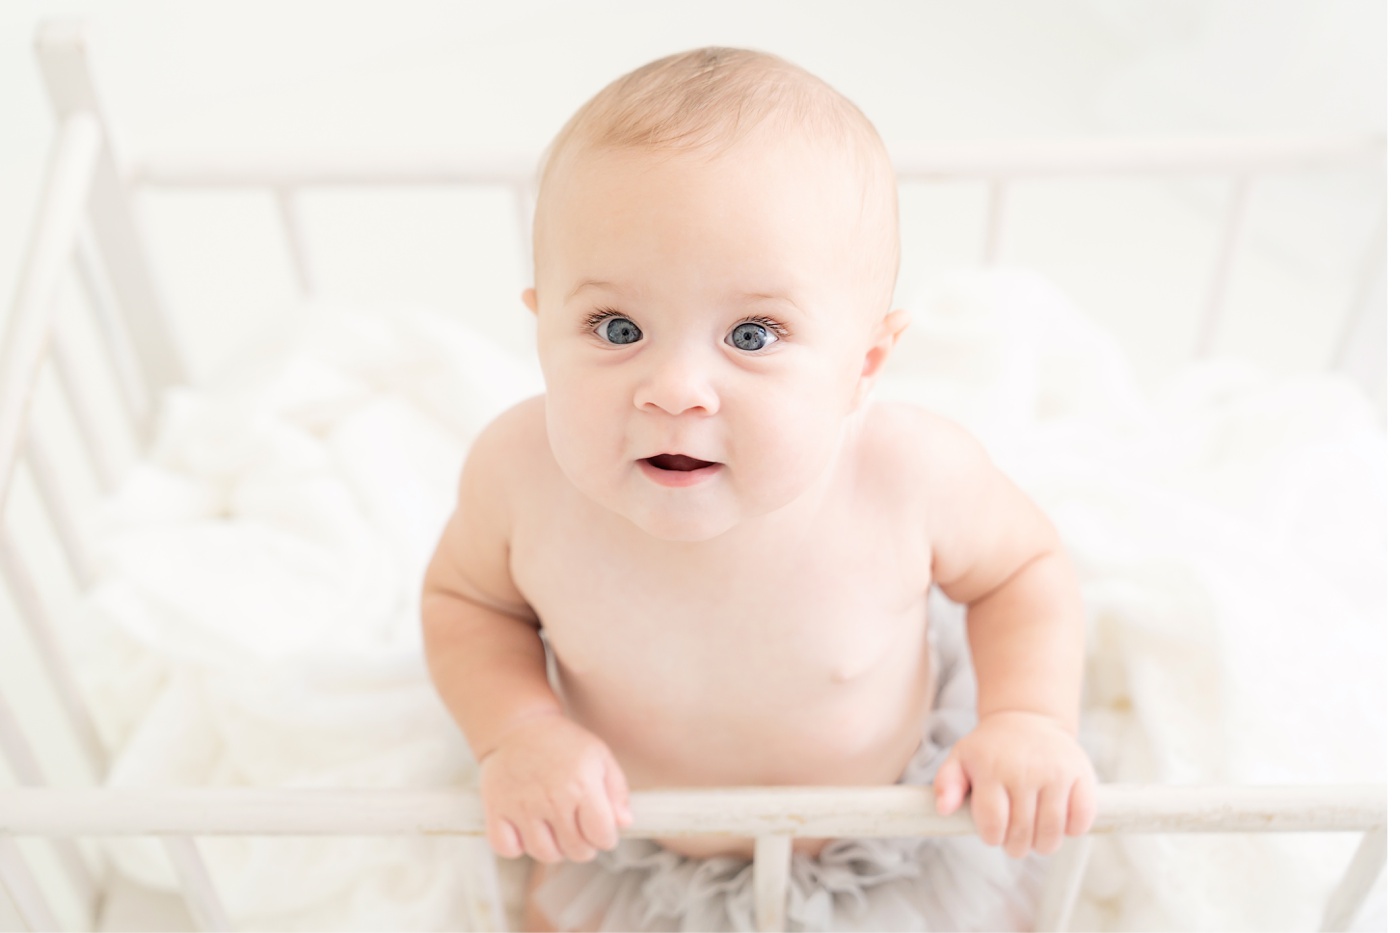 baby in antique crib being photographed in a white photography studio